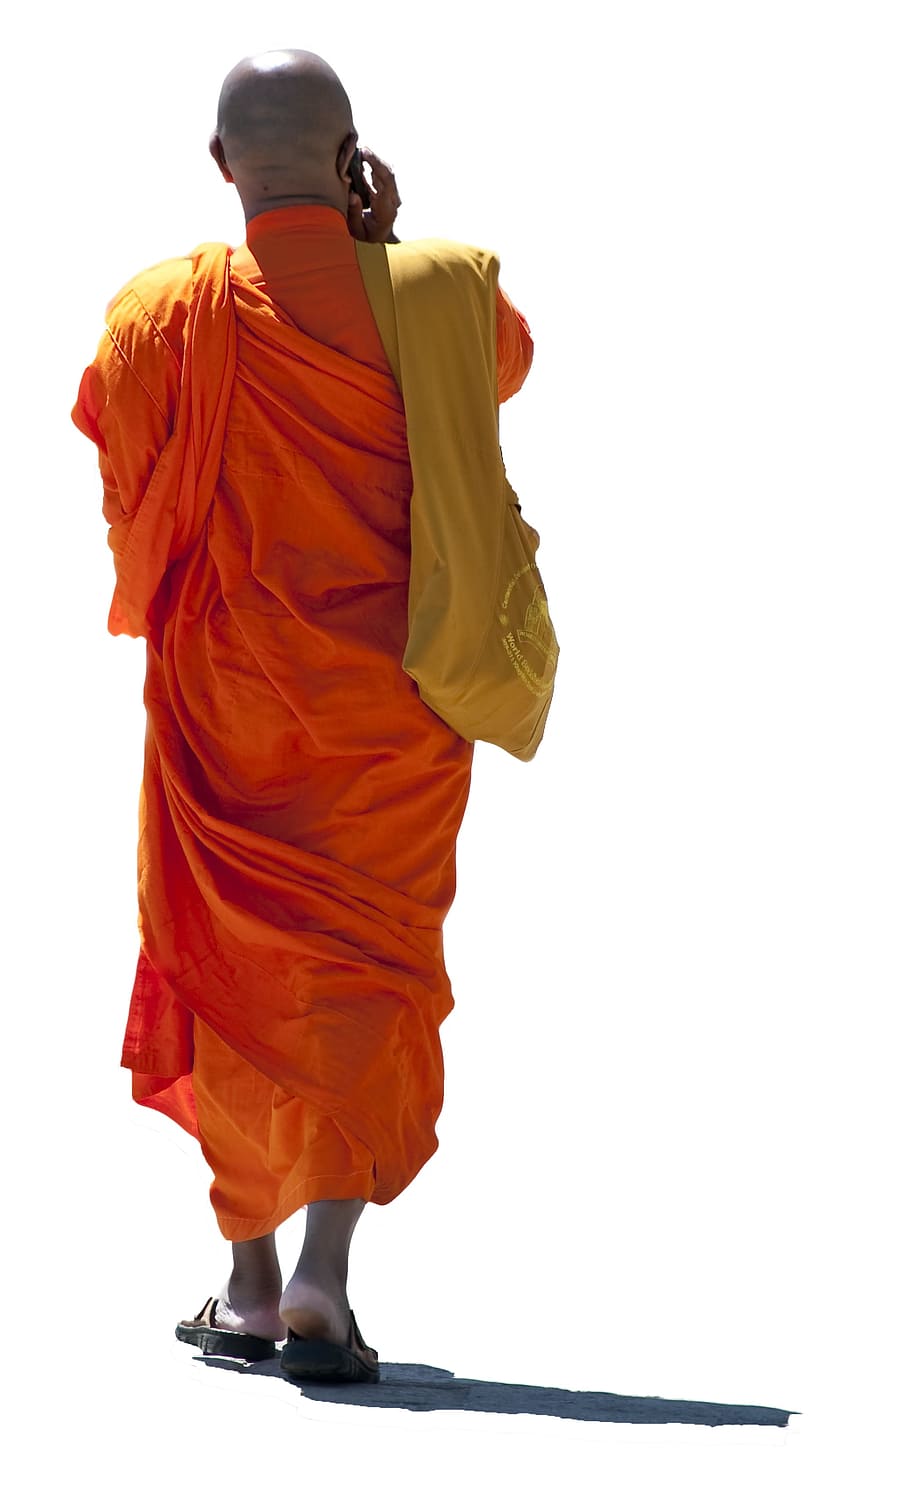 man, monk outfit, standing, close, monk, outfit, close up, buddhist monk, talk mobile, religion